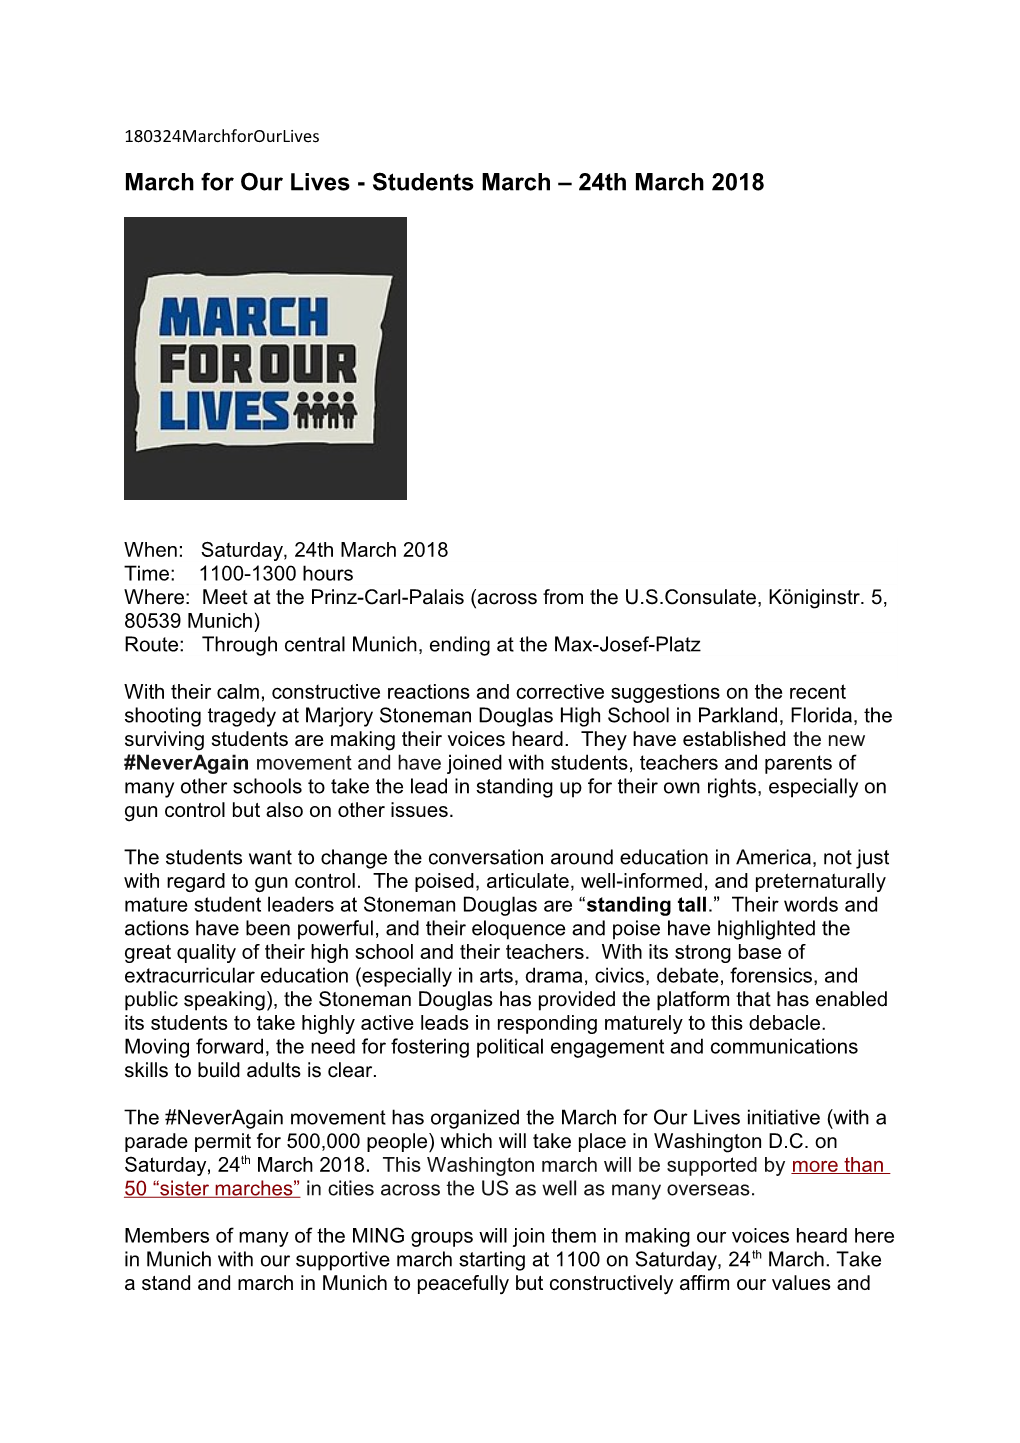 March for Our Lives - Students March 24Thmarch 2018